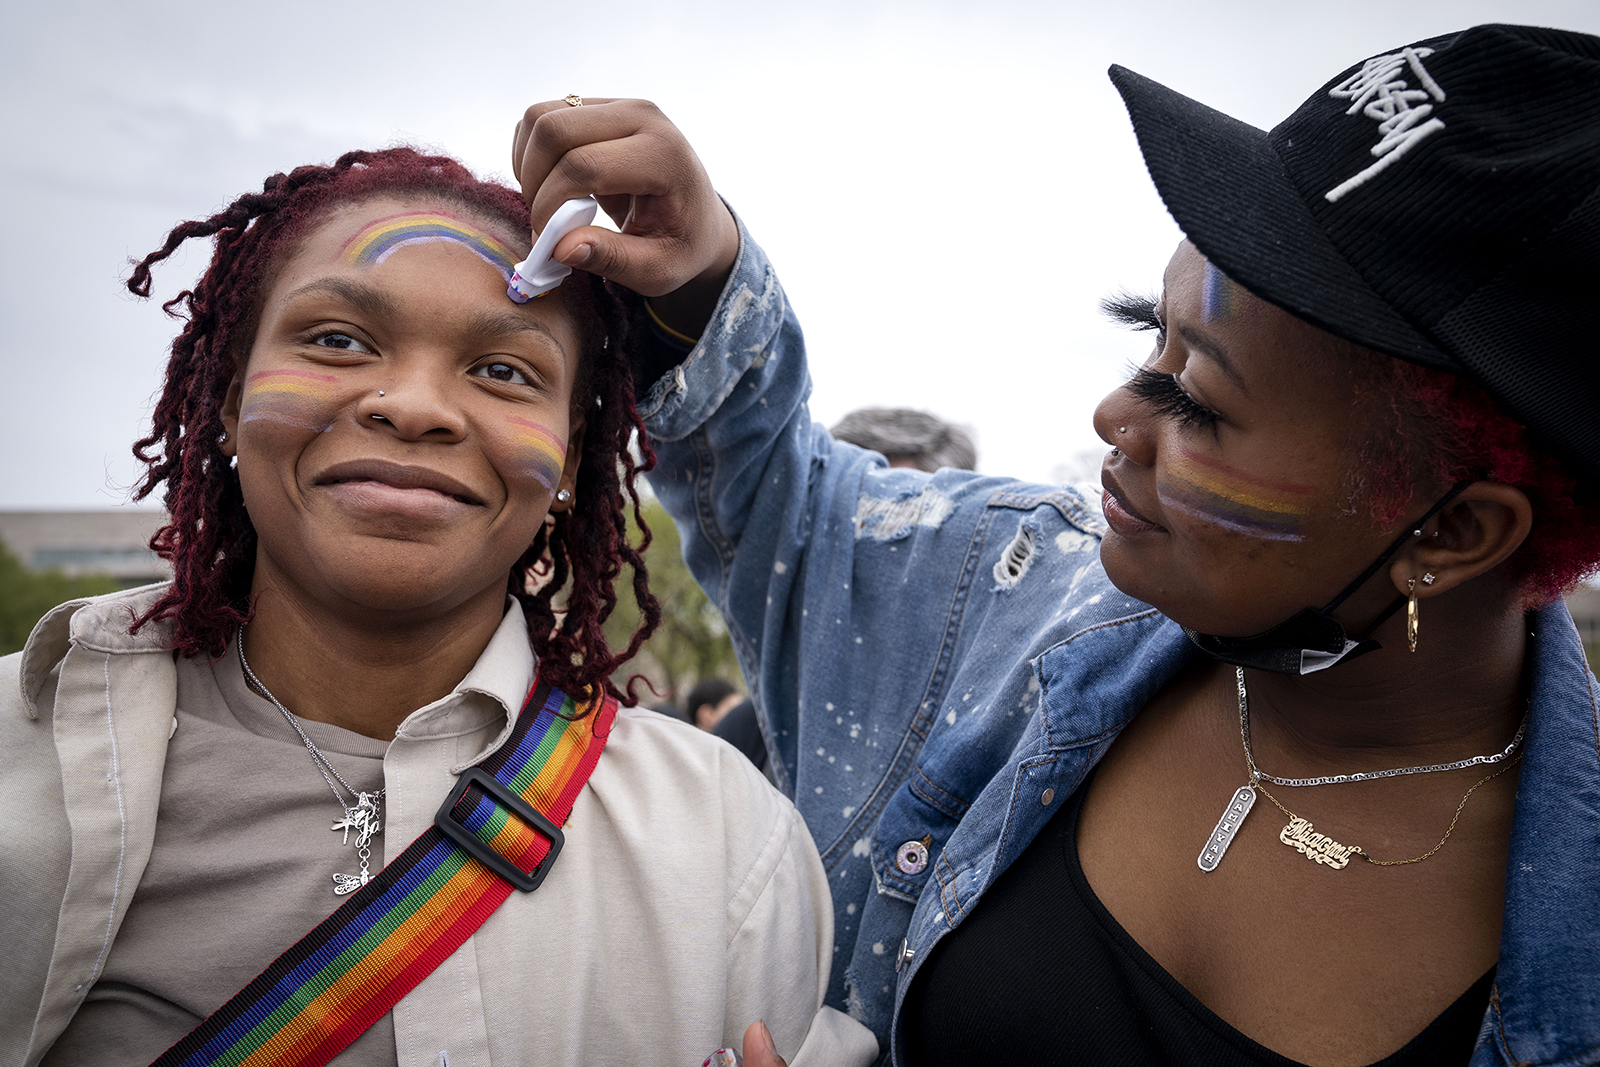 Jamiyah Morrison, 19, of Riverdale, Md., left, has rainbow makeup touched up by Niaomi Moshier, 21, while attending a rally as part of Transgender Day of Visibility, Friday, March 31, 2023, near the Capitol in Washington. "I was never out as a child," says Morrison, "and didn't have the support. So what if my child identifies as trans? I need them to have the rights as well." (AP Photo/Jacquelyn Martin)